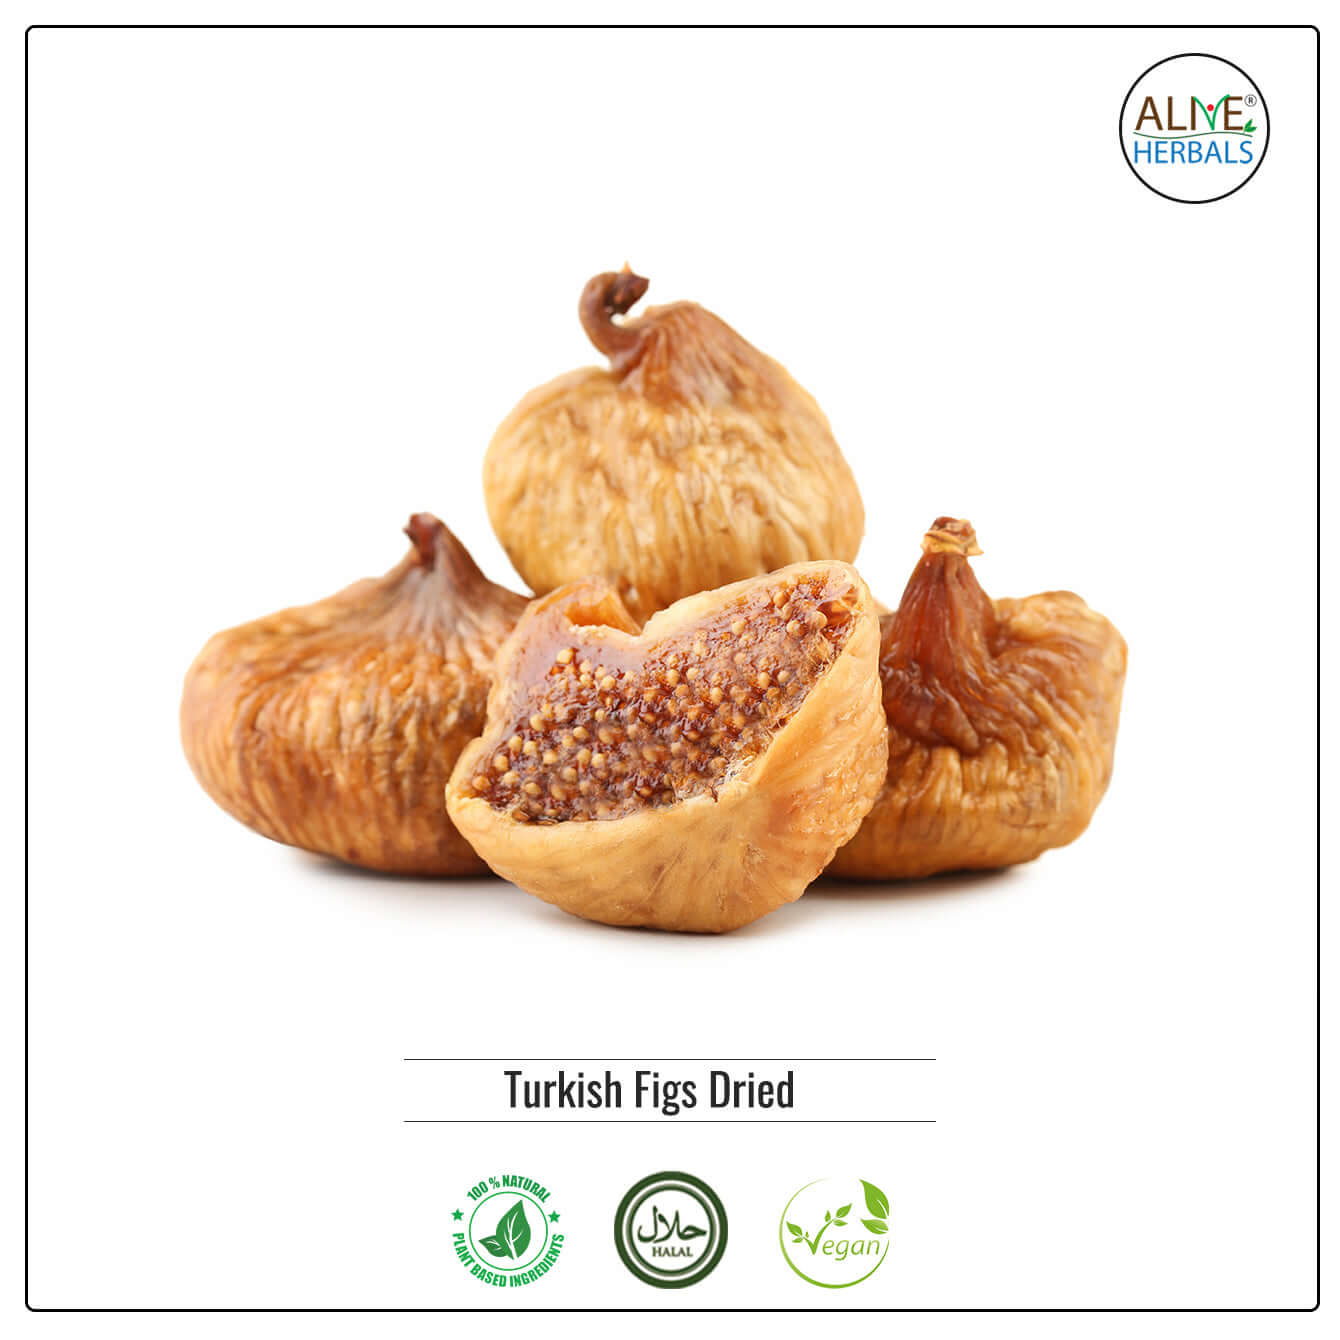 Figs Turkish - Buy at Natural Food Store | Alive Herbals.